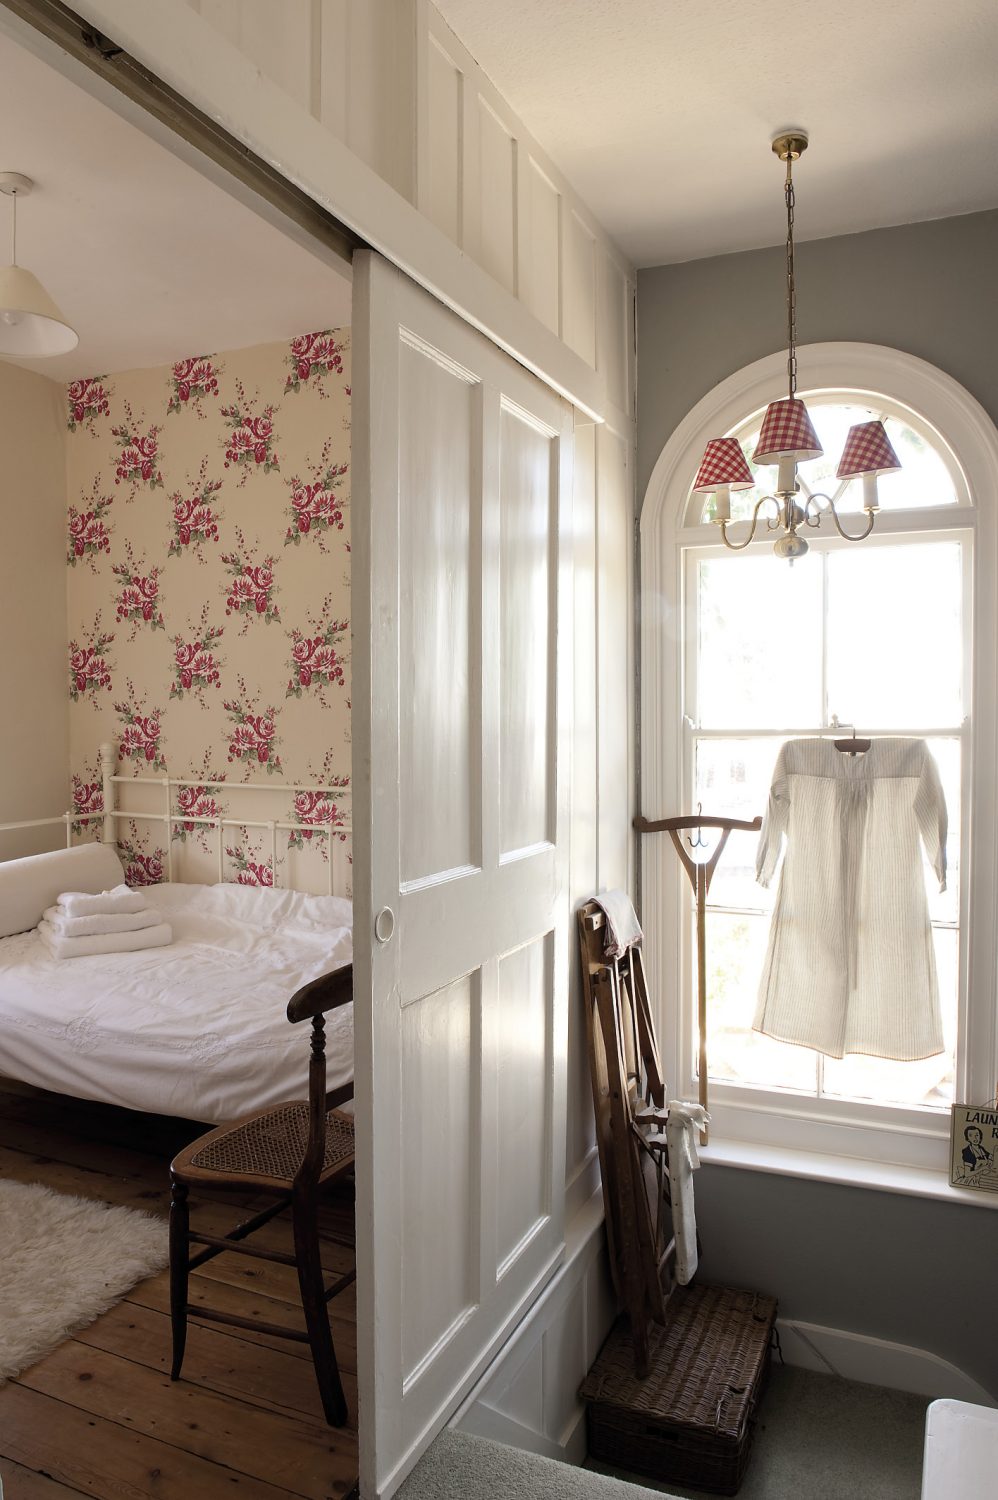 Just across the corridor, behind a sliding door and tucked away in the tower, is a small wood-panelled bedroom that’s very popular with visiting children. There is an iron daybed and the wall behind it is papered with jolly, striped red and white roses...